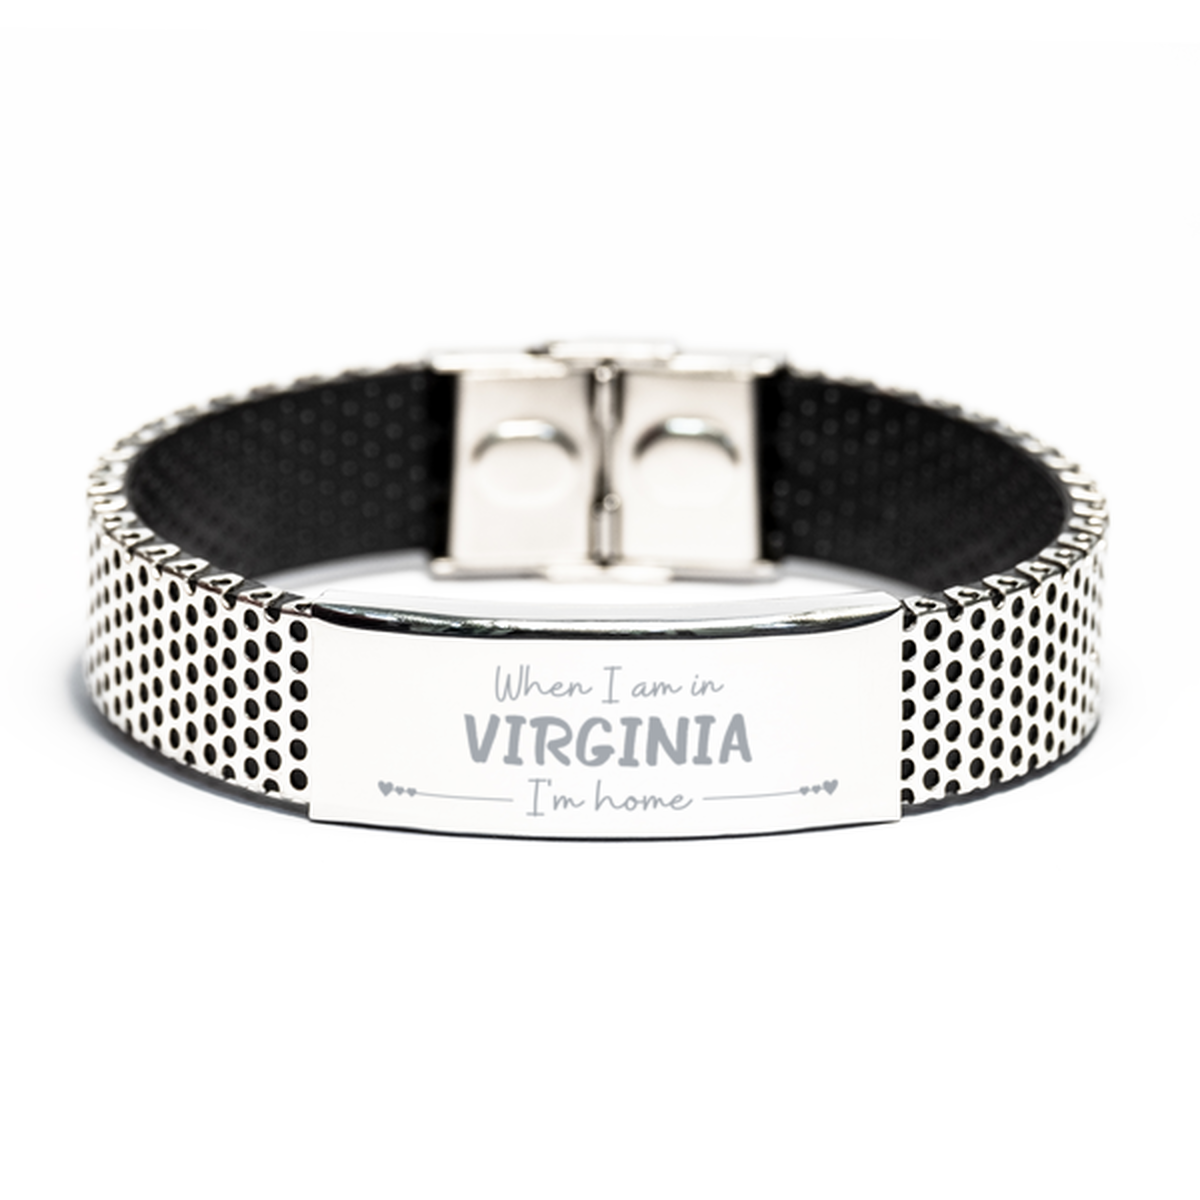 When I am in Virginia I'm home Stainless Steel Bracelet, Cheap Gifts For Virginia, State Virginia Birthday Gifts for Friends Coworker